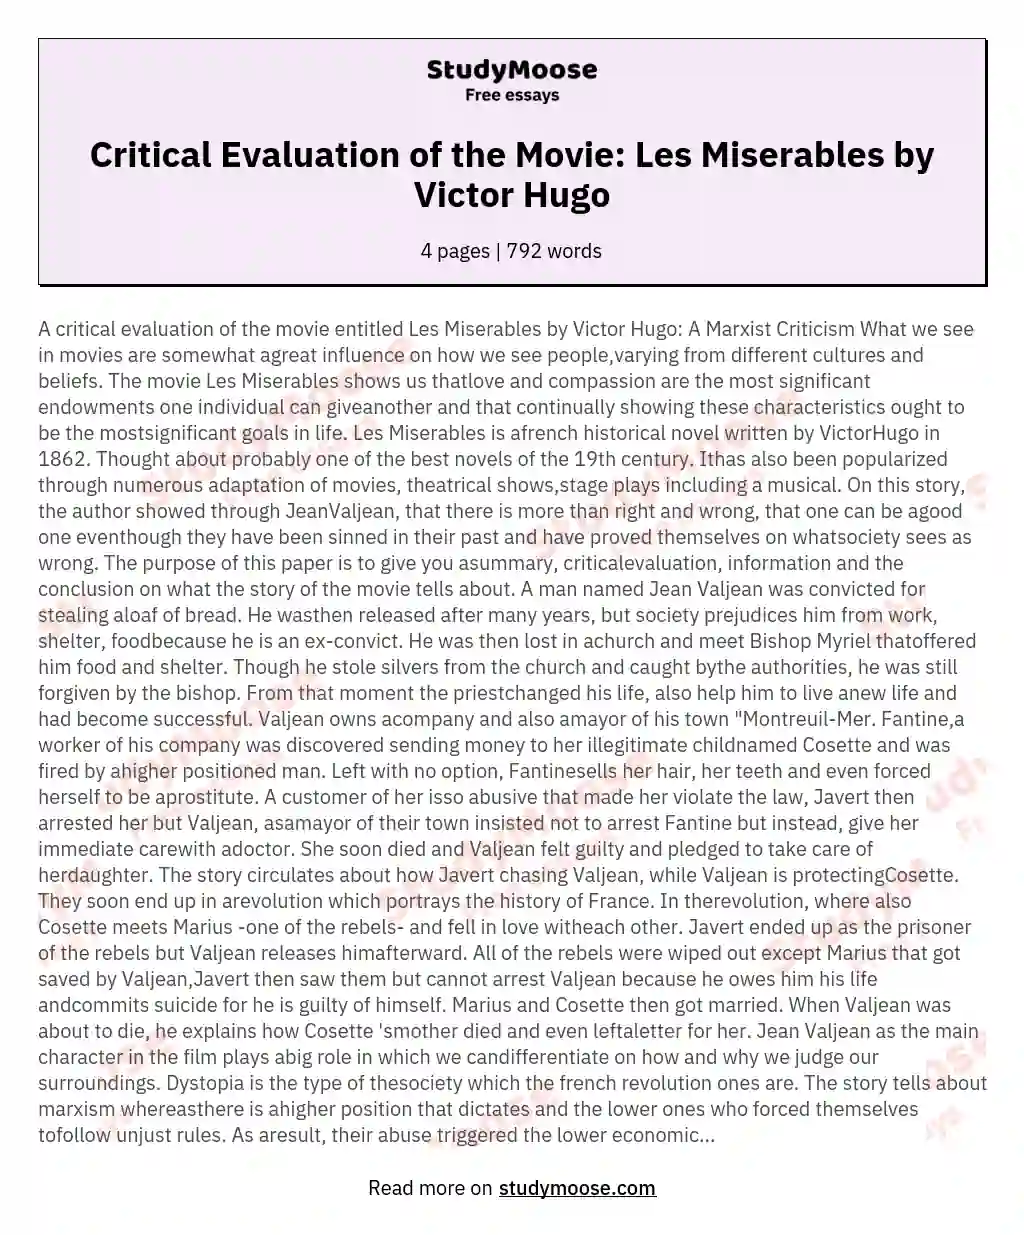 Critical Evaluation of the Movie: Les Miserables by Victor Hugo essay